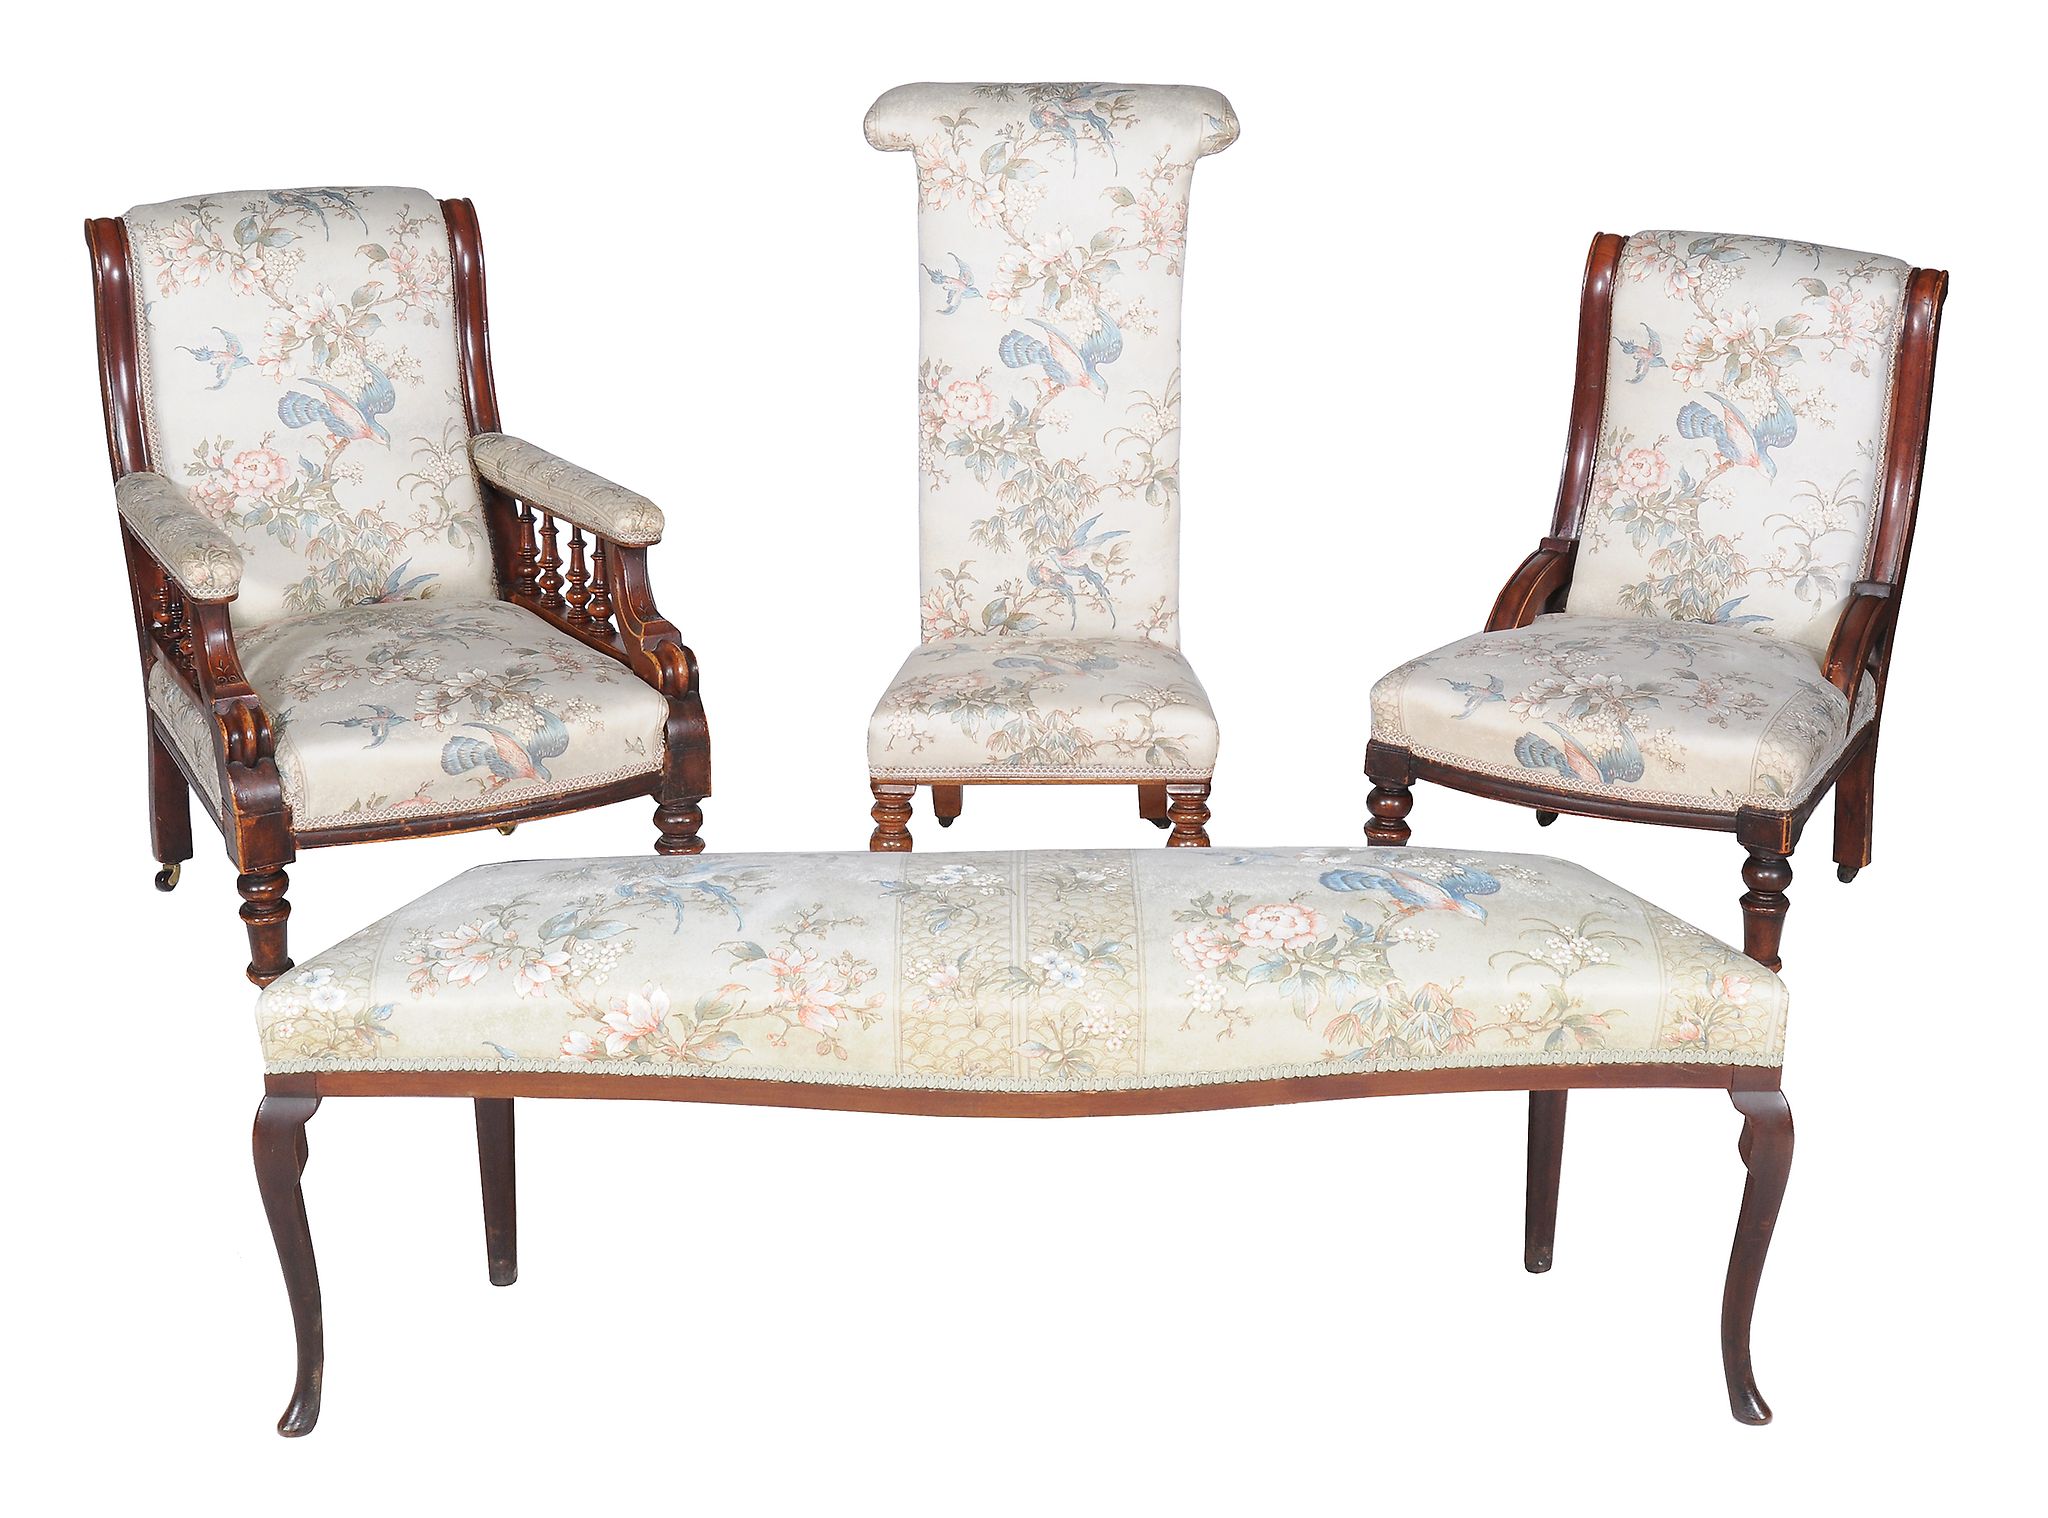 Two Victorian mahogany & upholstered salon chairs, of the same suite, circa 1860, A Victorian prie